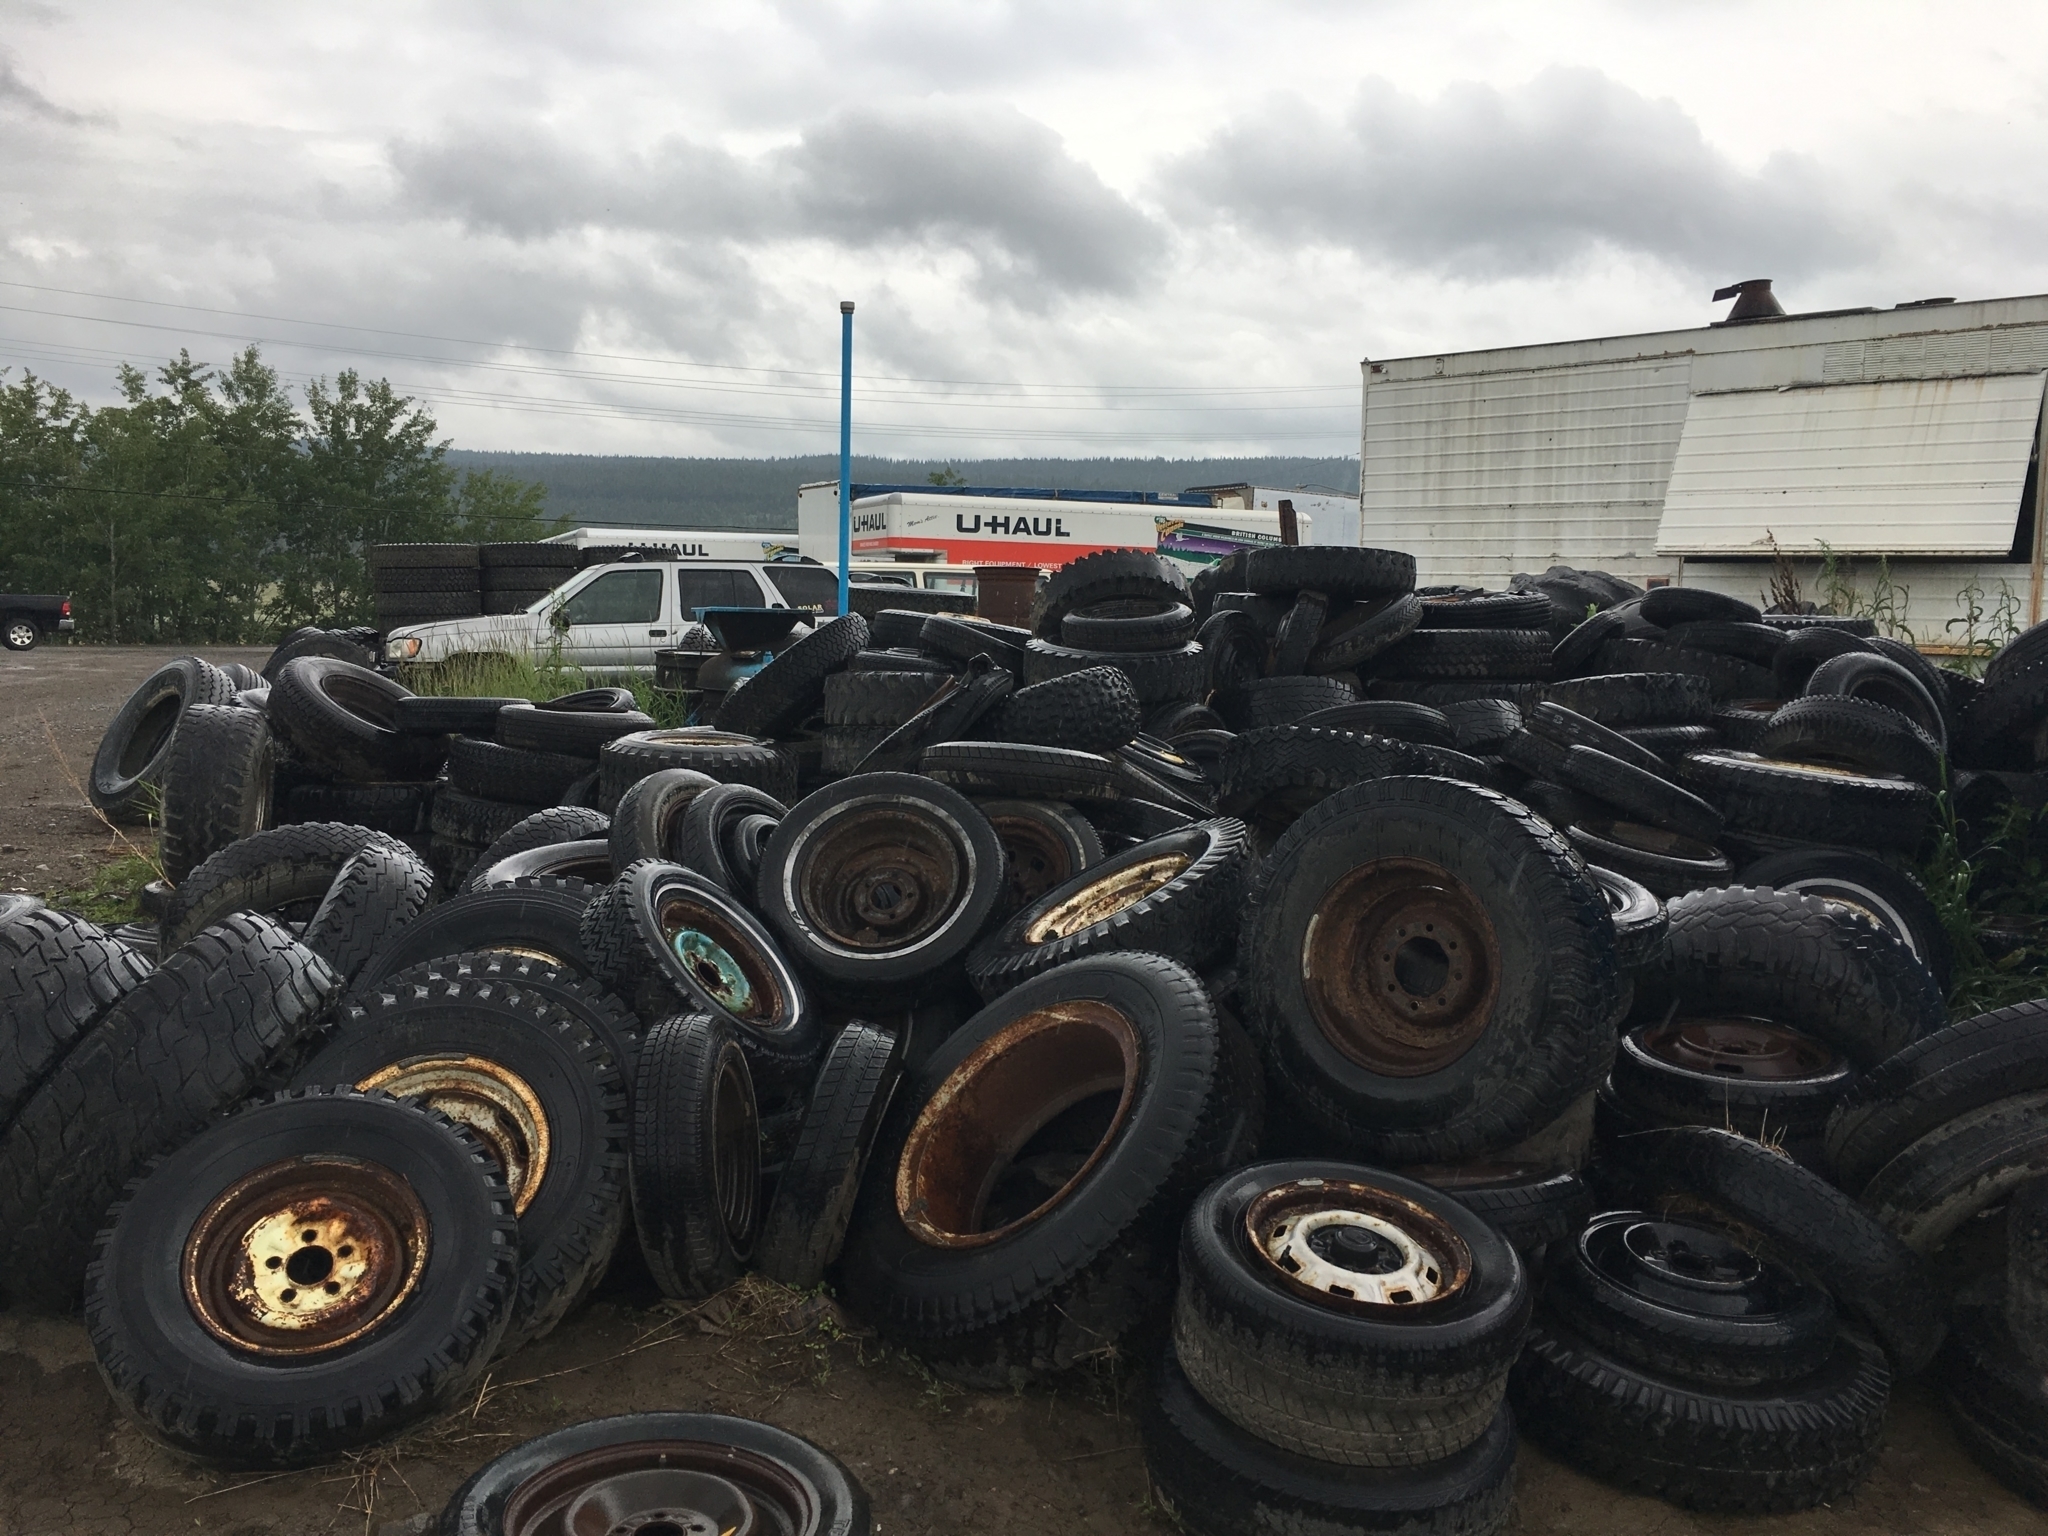 Country Tirecraft - Tire Retailers